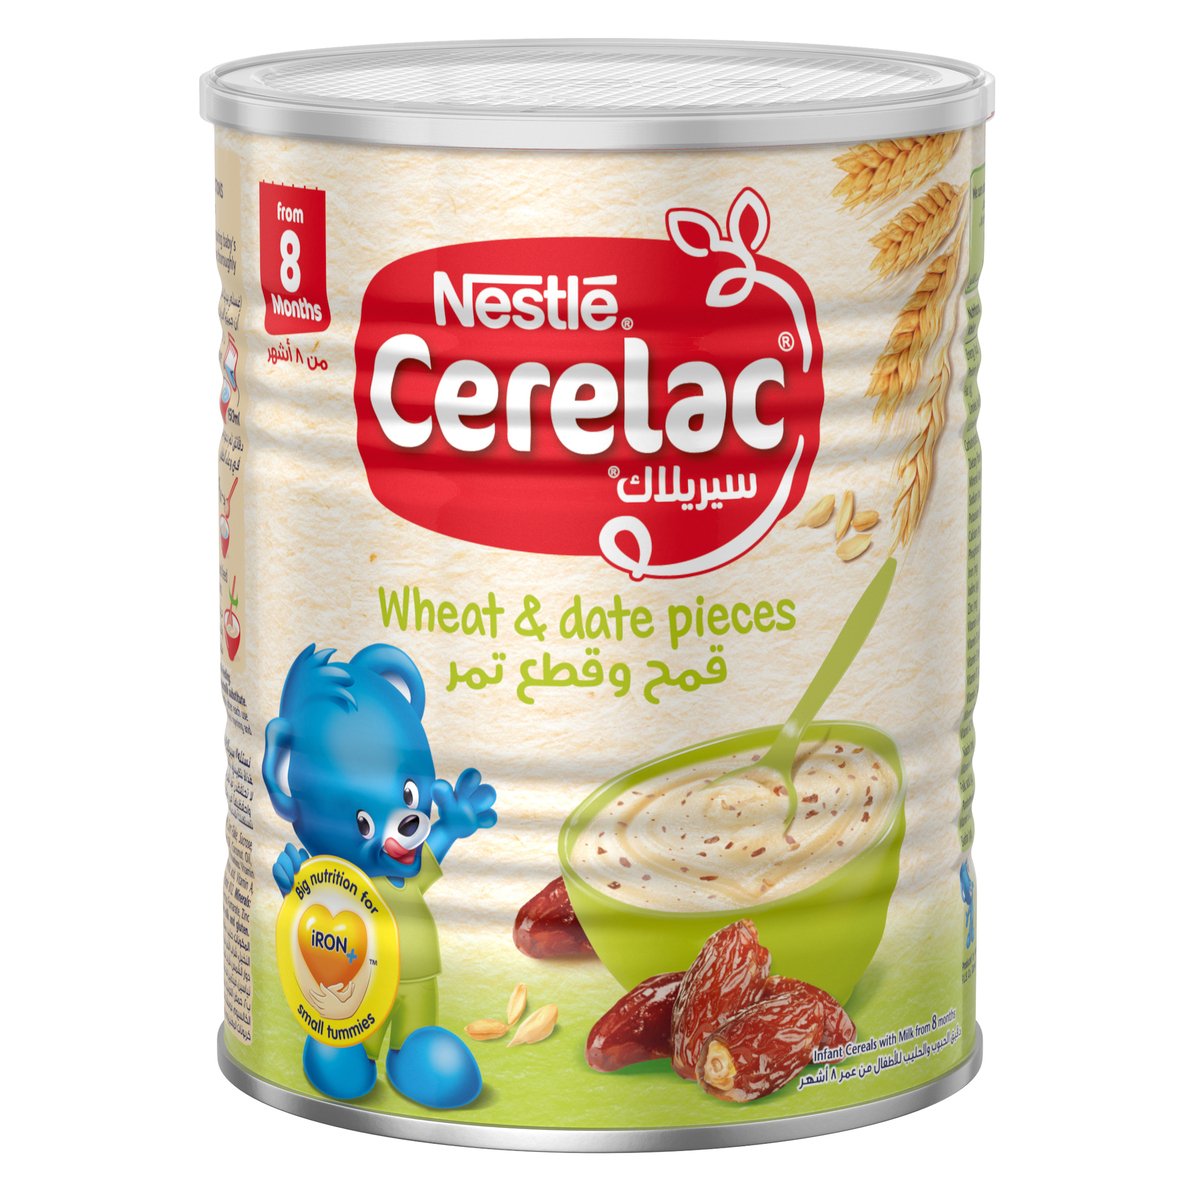 Nestle Cerelac Infant Cereals with Iron + Wheat & Date Pieces From 8 Months 400 g